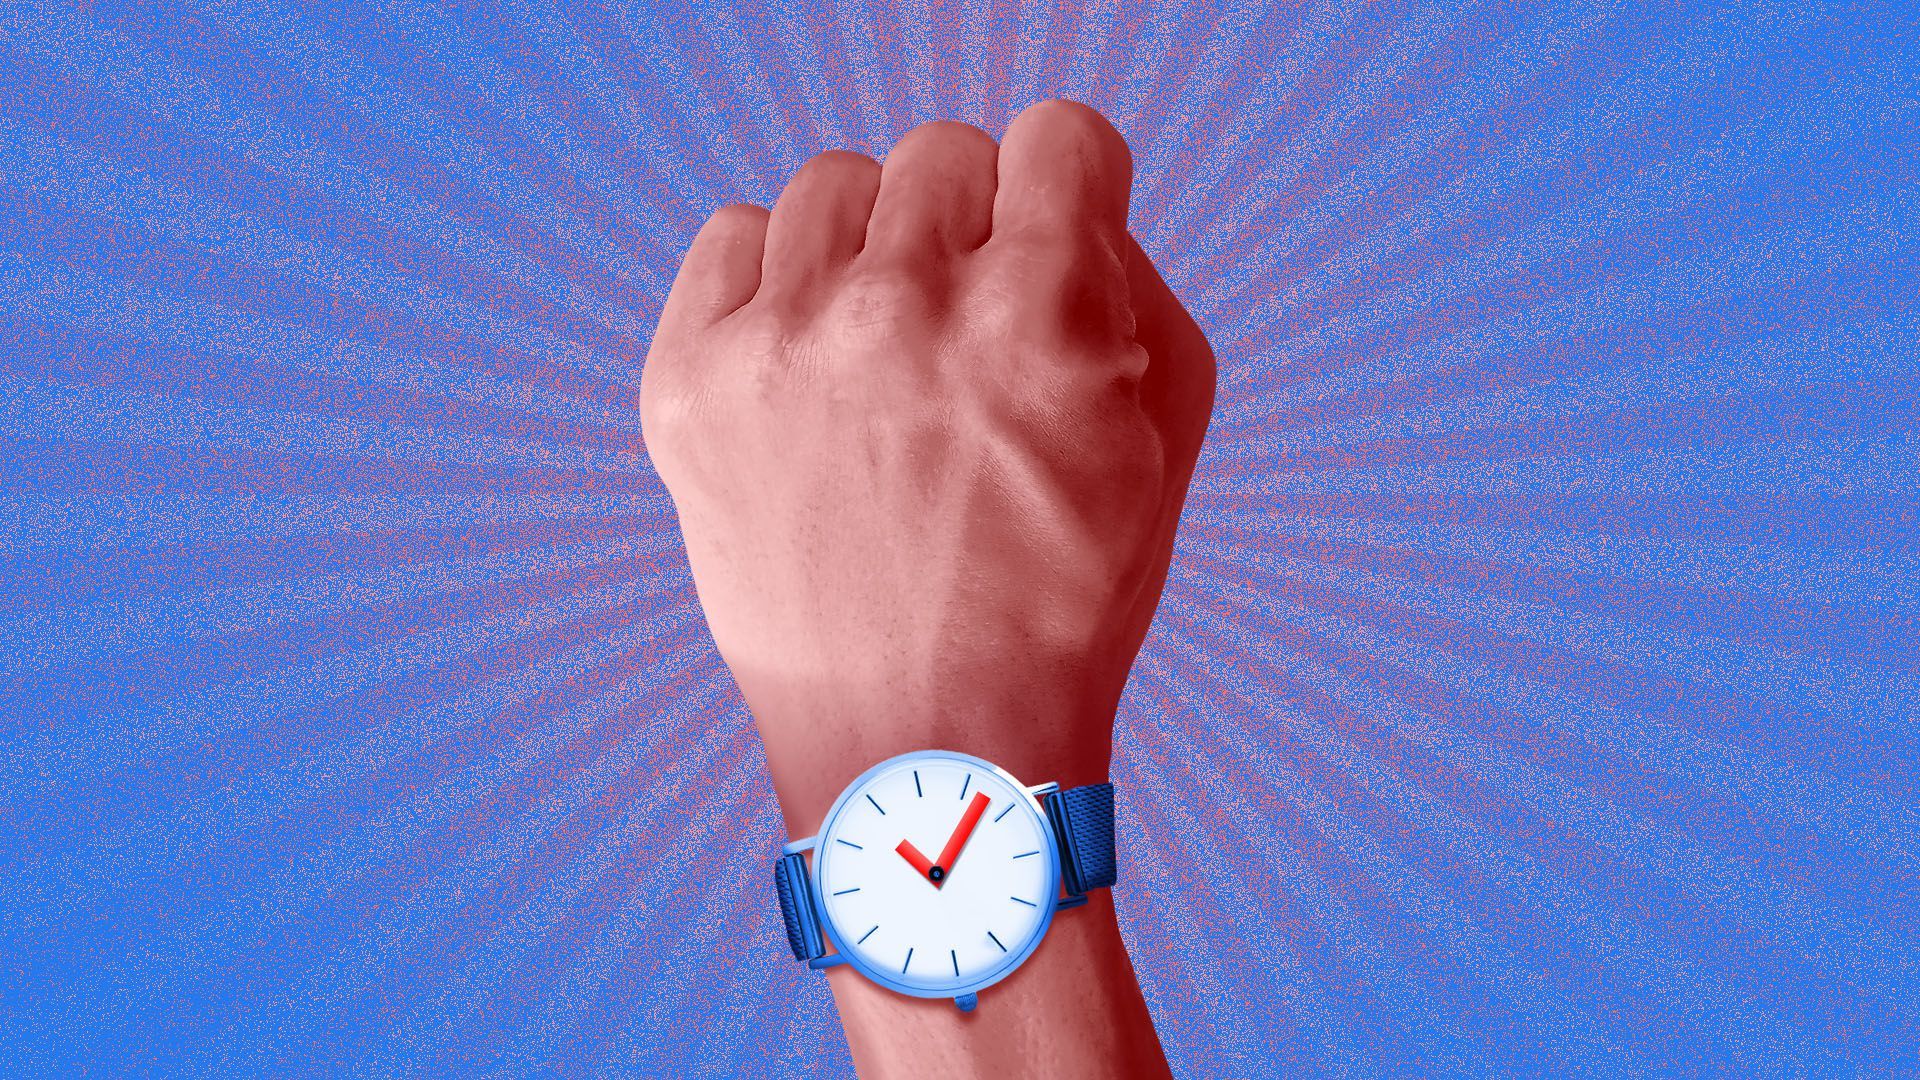 Illustration of a fist wearing a watch with hands in the shape of a check mark